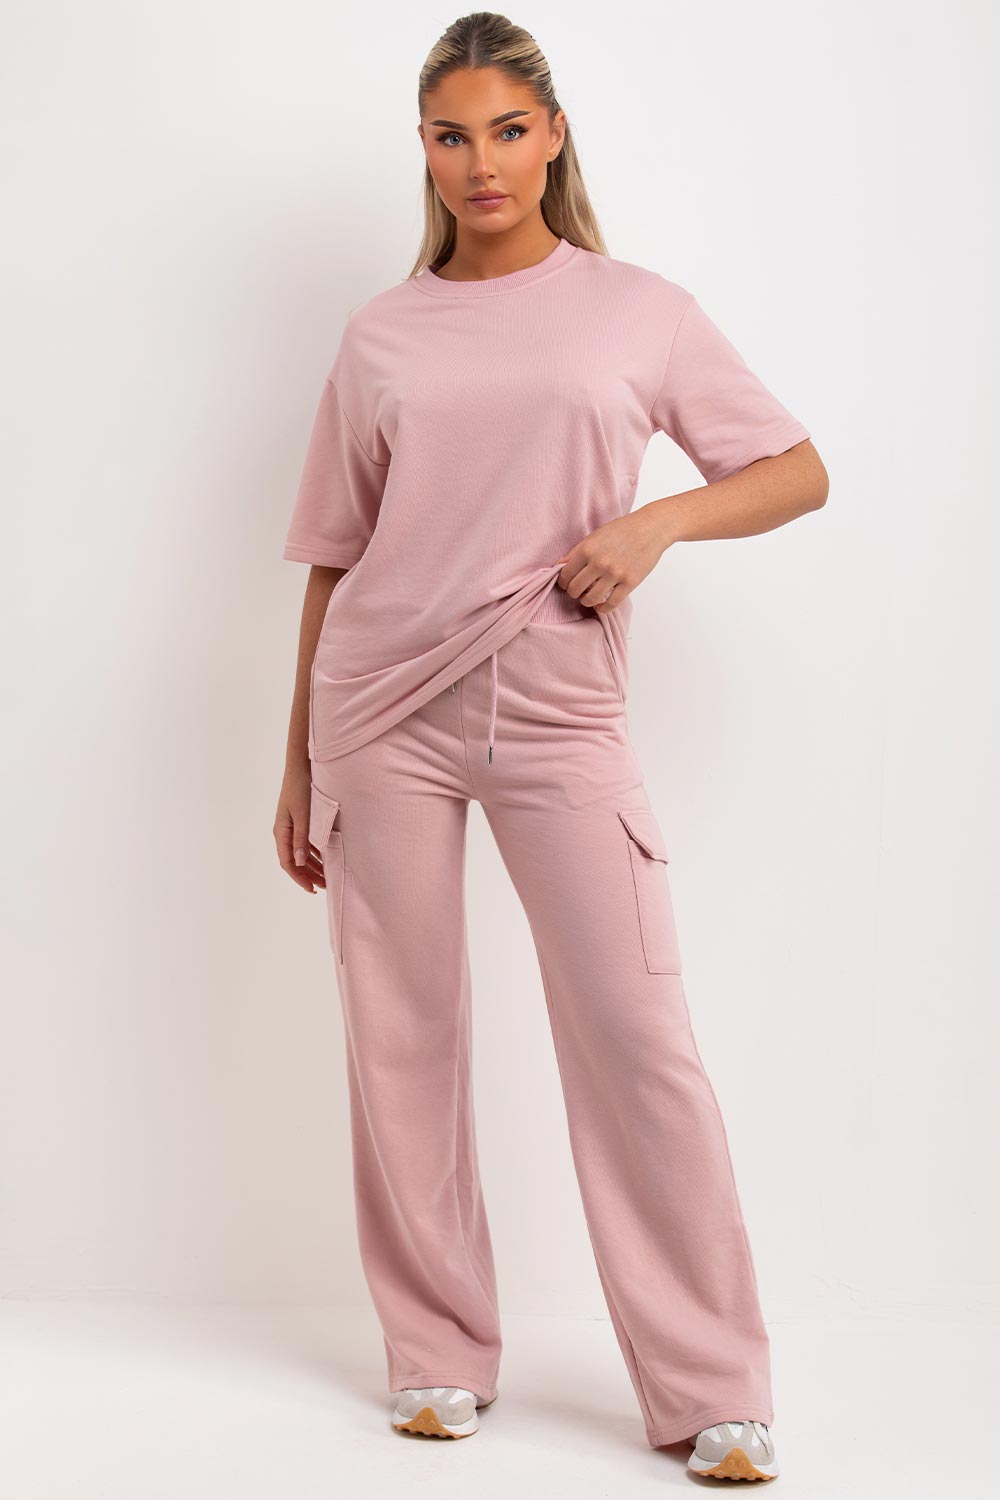 pink wide leg trousers with cargo pockets and t shirt co ord loungewear set